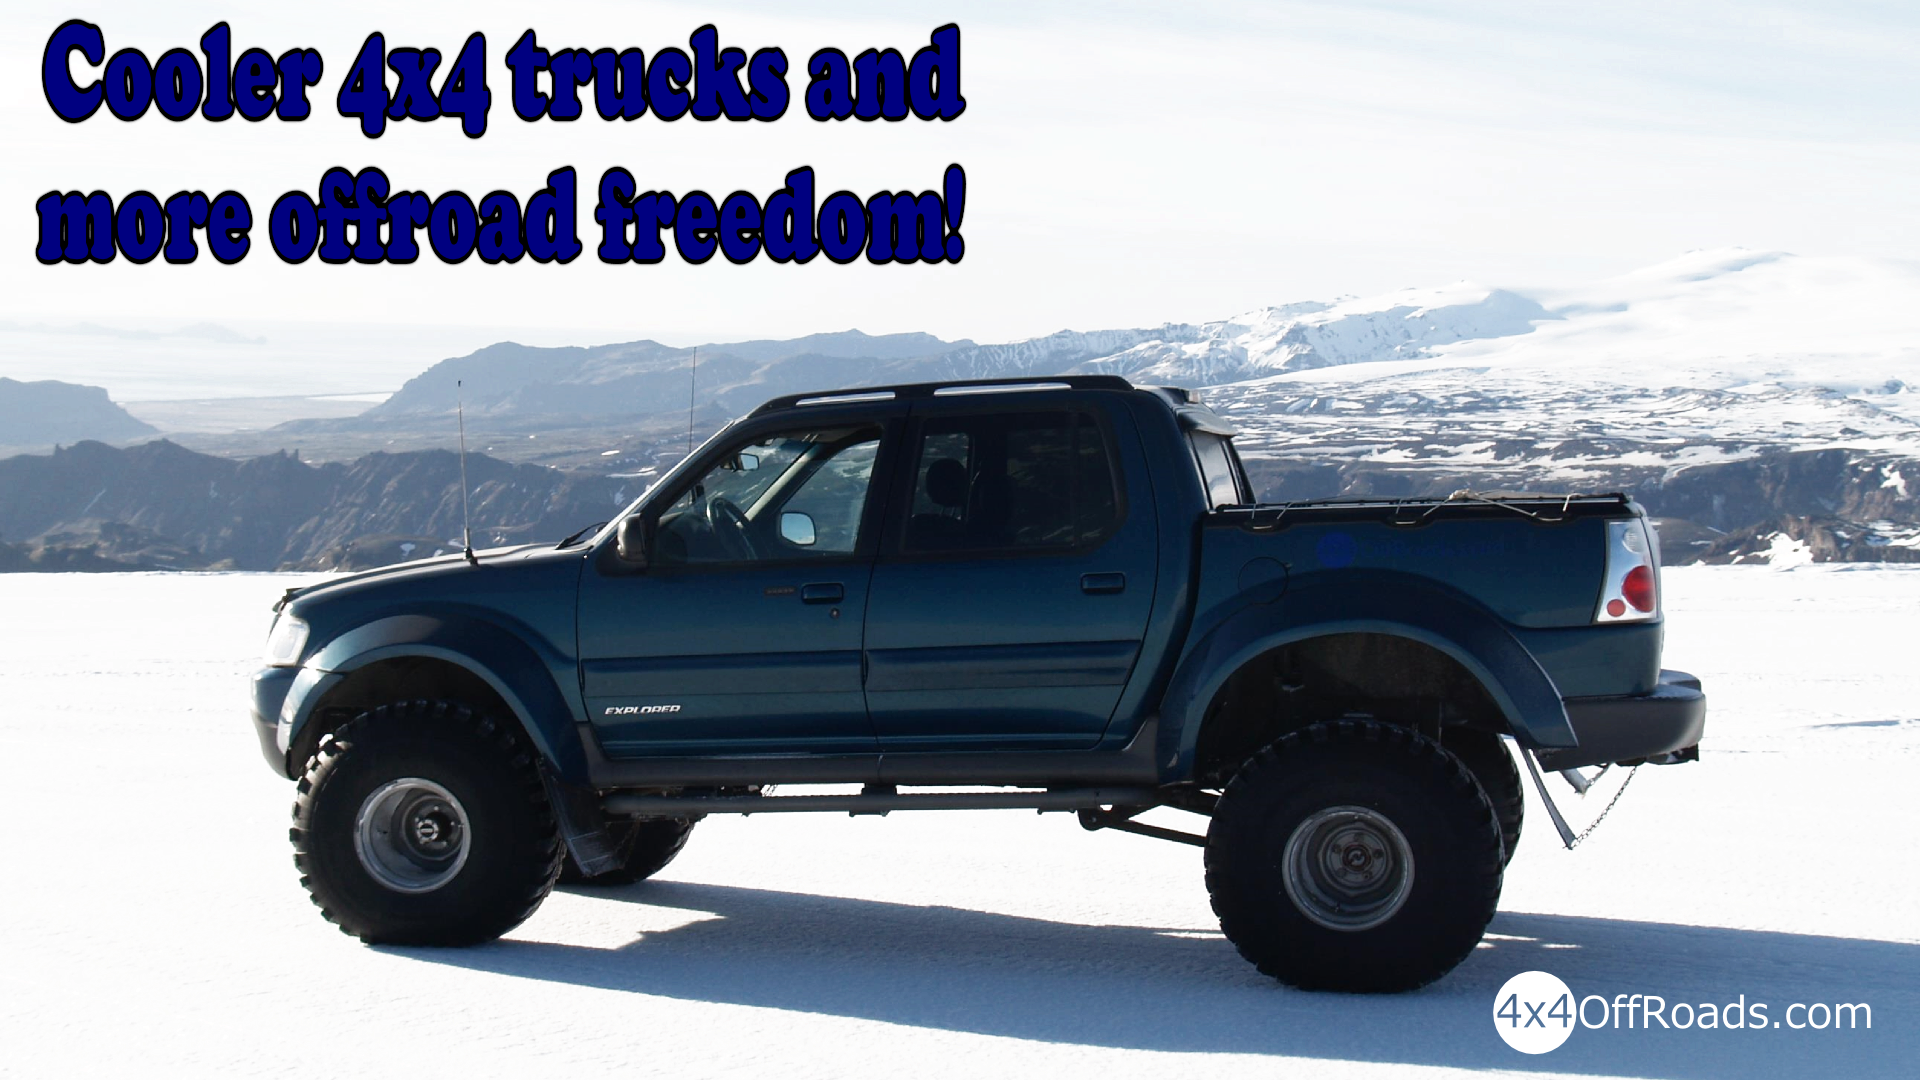 Cooler Truck - Ford Sport Trac 4x4 Lifted , HD Wallpaper & Backgrounds